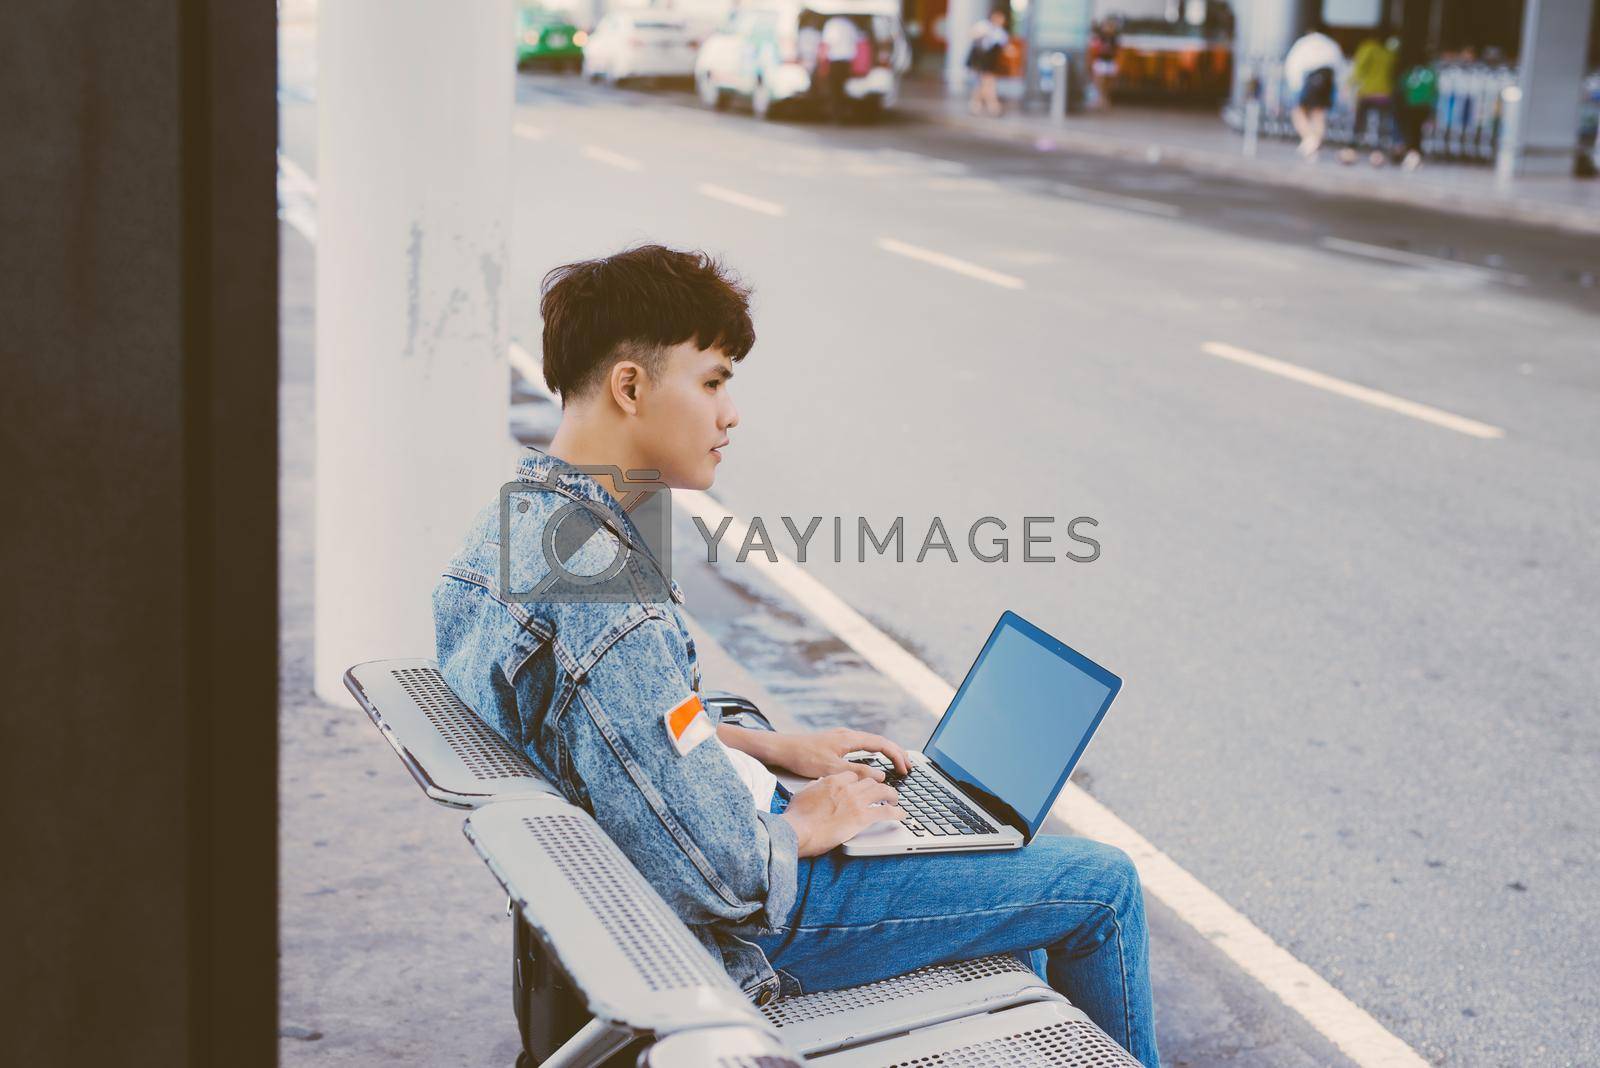 Royalty free image of Asian young man sitting on the chair at the airport bus stop and lusing laptop, side view by makidotvn